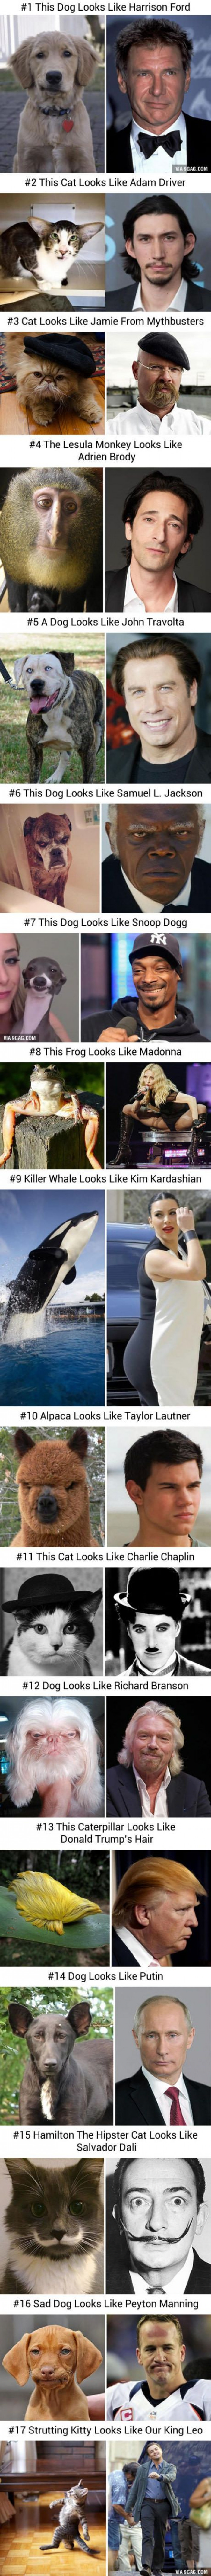 Celebrities With Animal Lookalikes. Keep Scrolling - They Get Better!